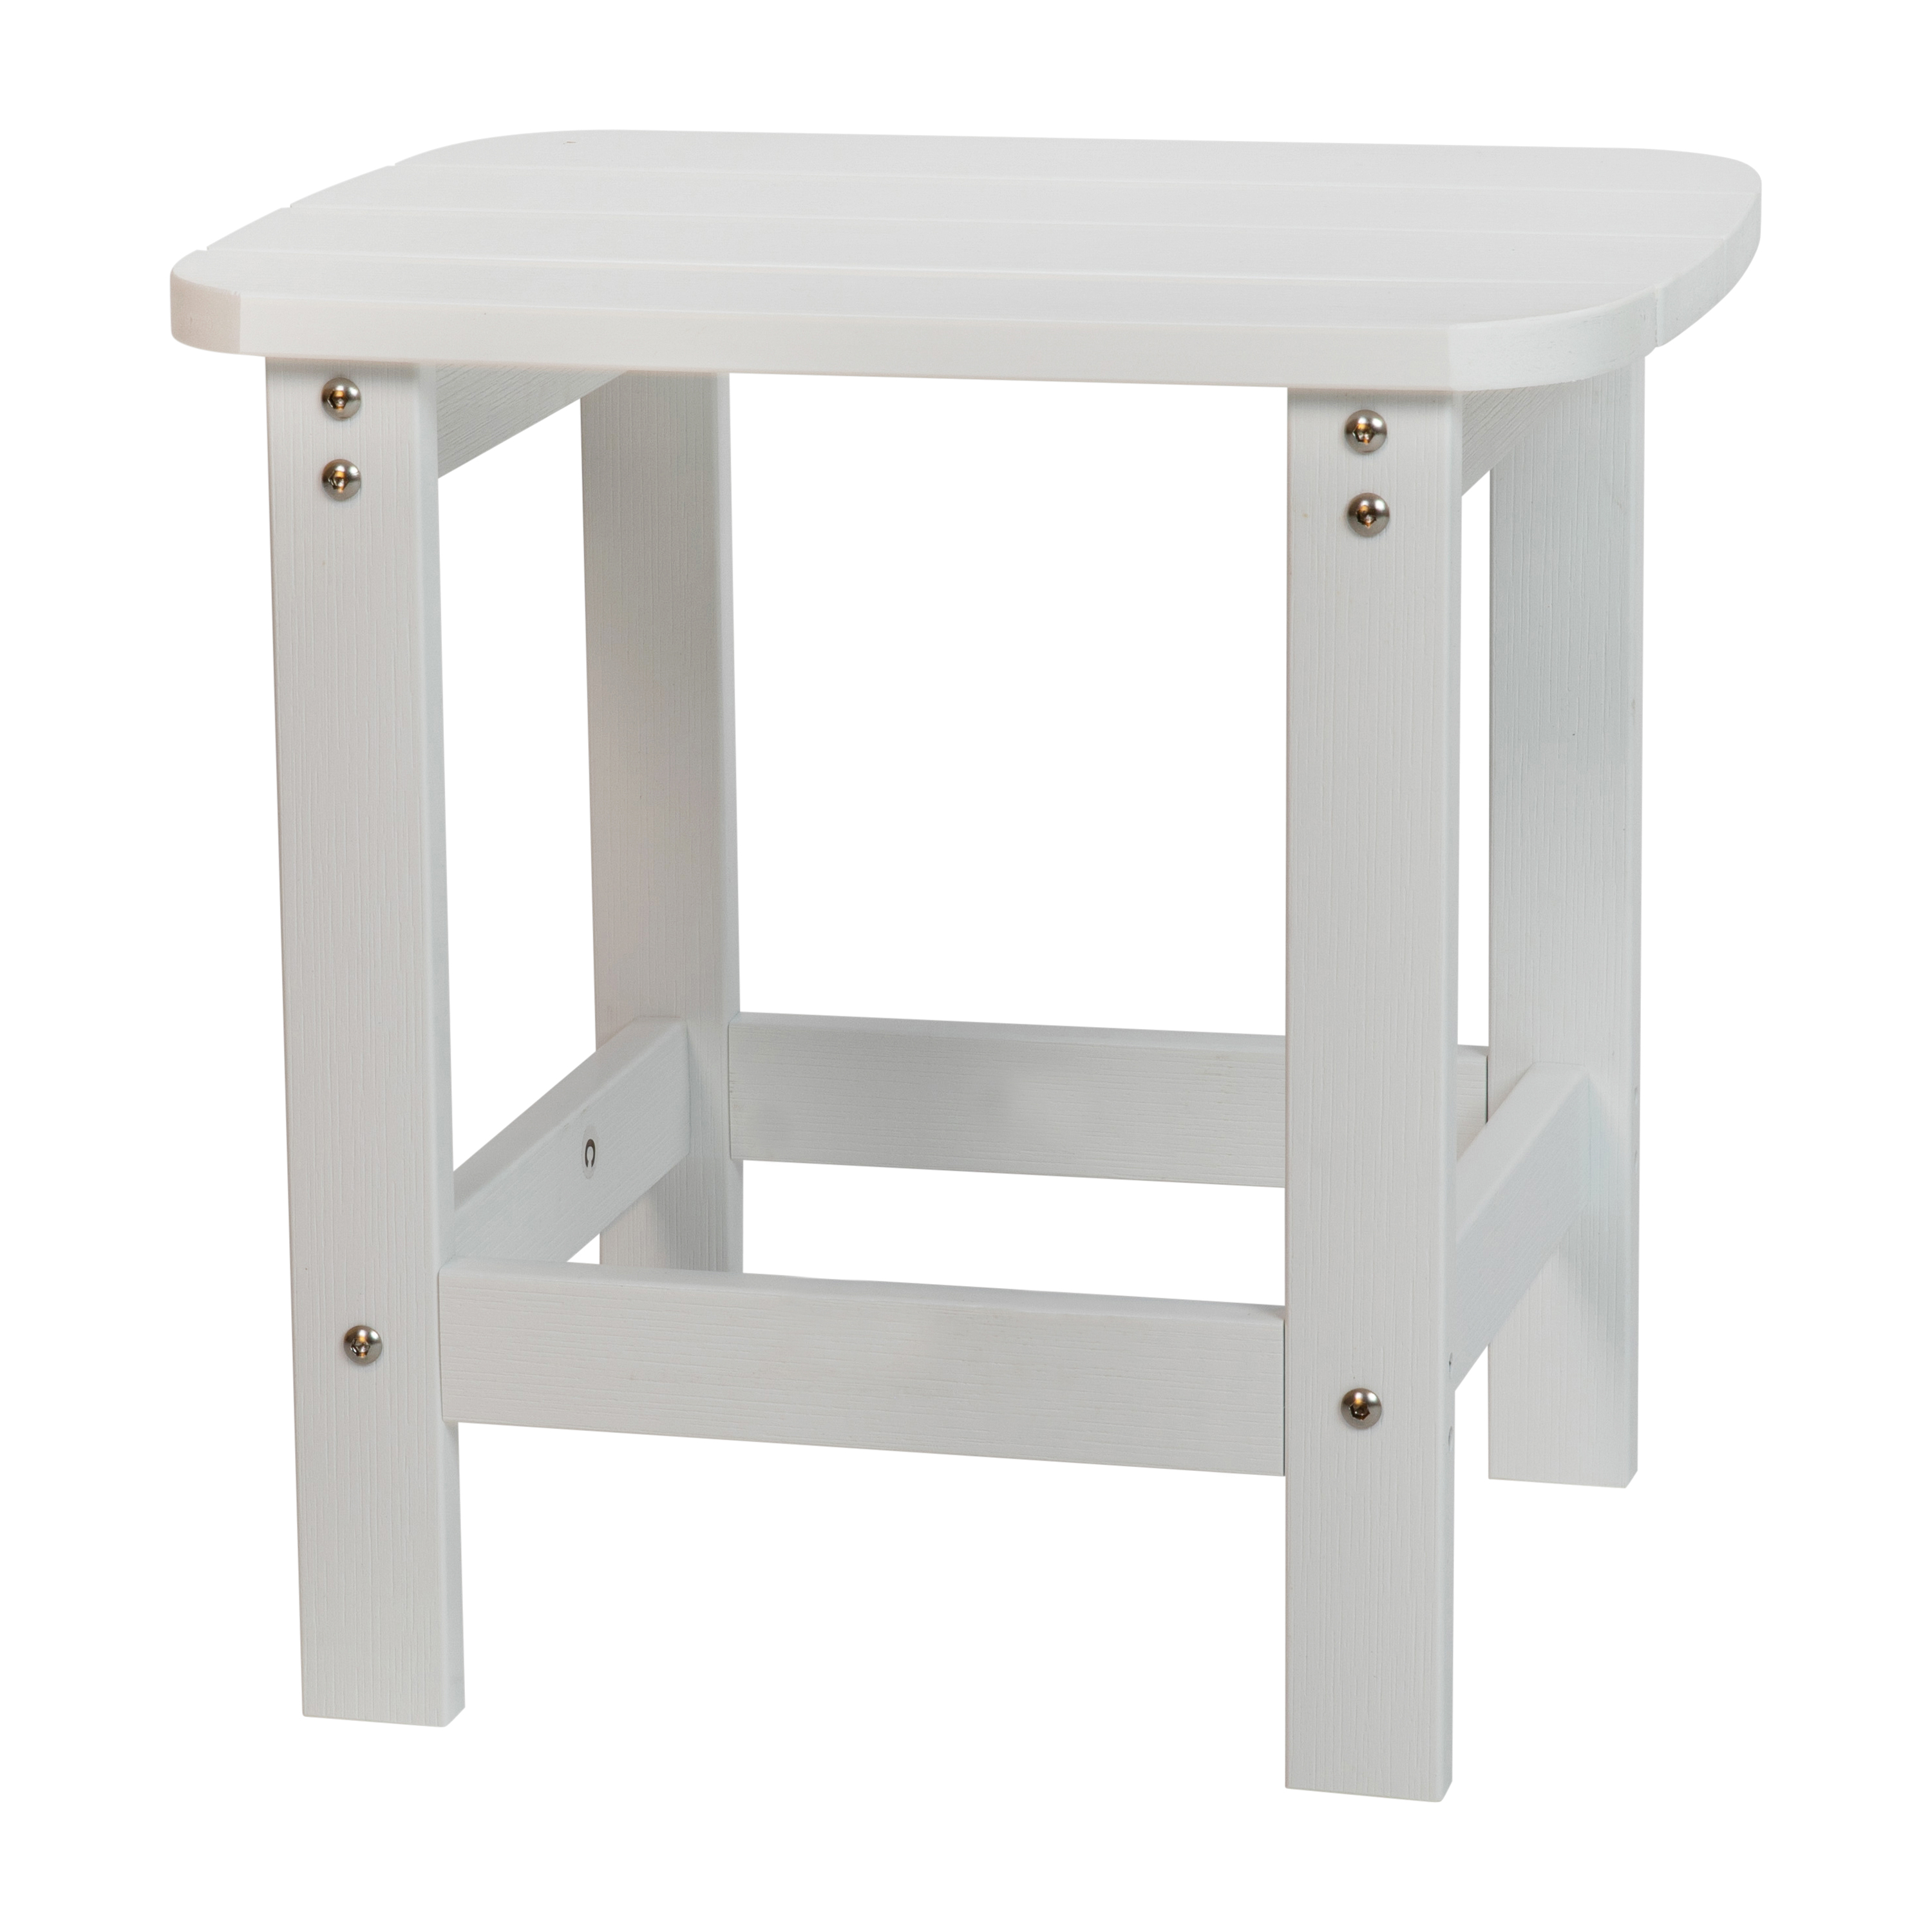 BizChair All-Weather Poly Resin Wood Commercial Grade Adirondack Side Table in White - image 2 of 9